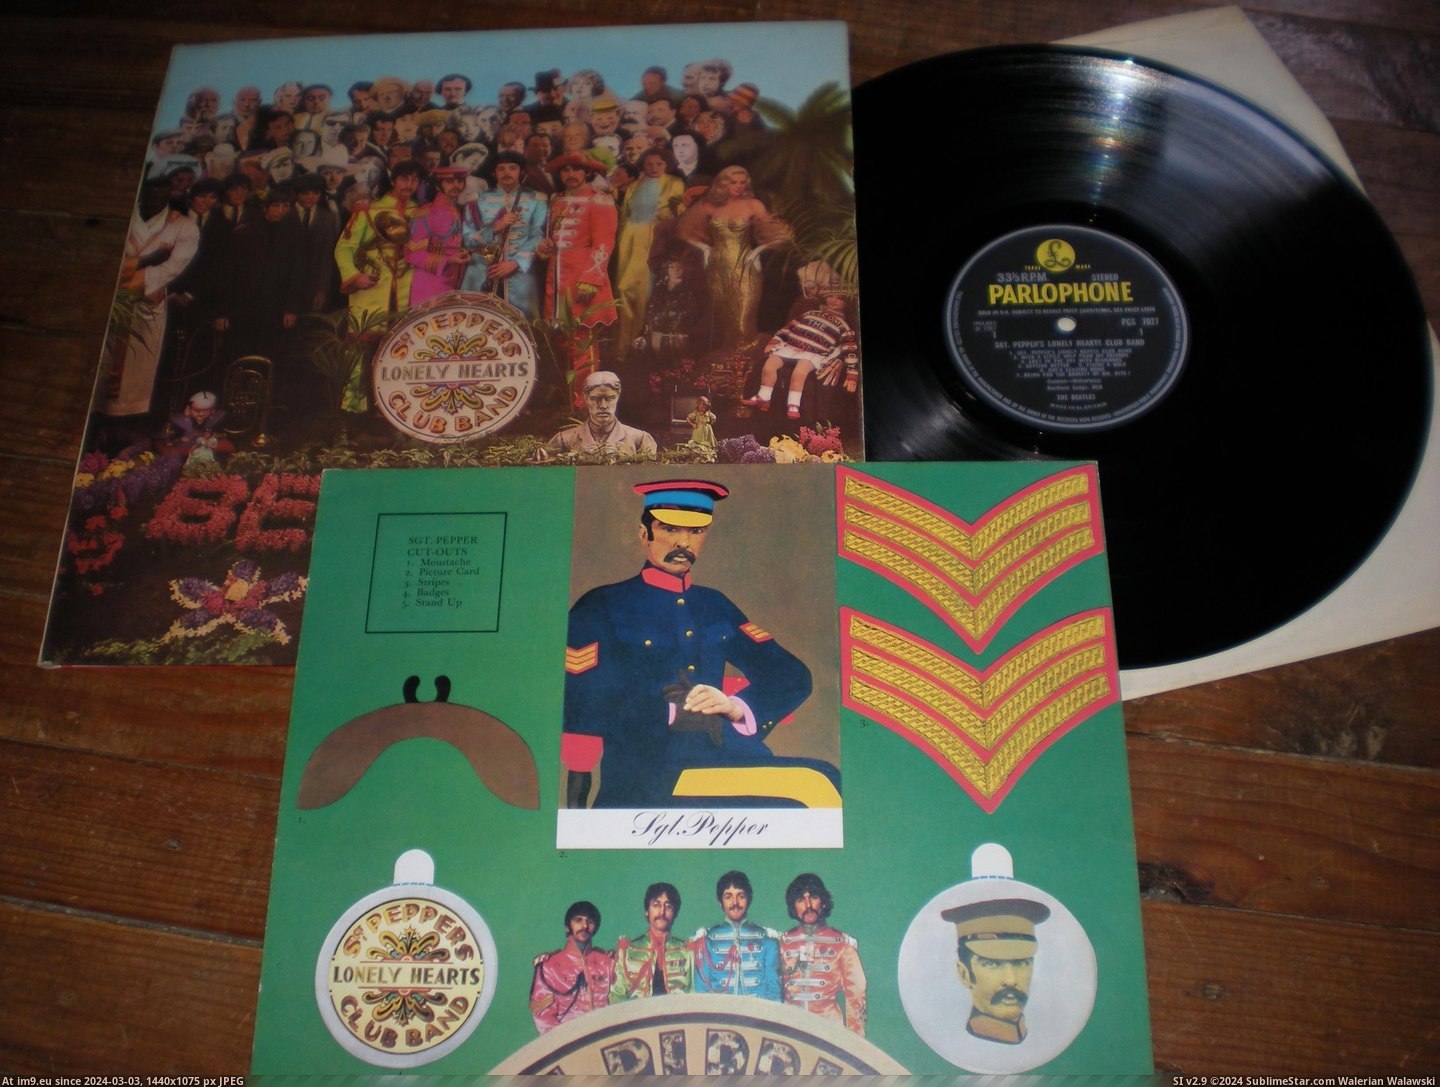 #Sgt  #Stereo Sgt Stereo 2 Pic. (Image of album new 1))